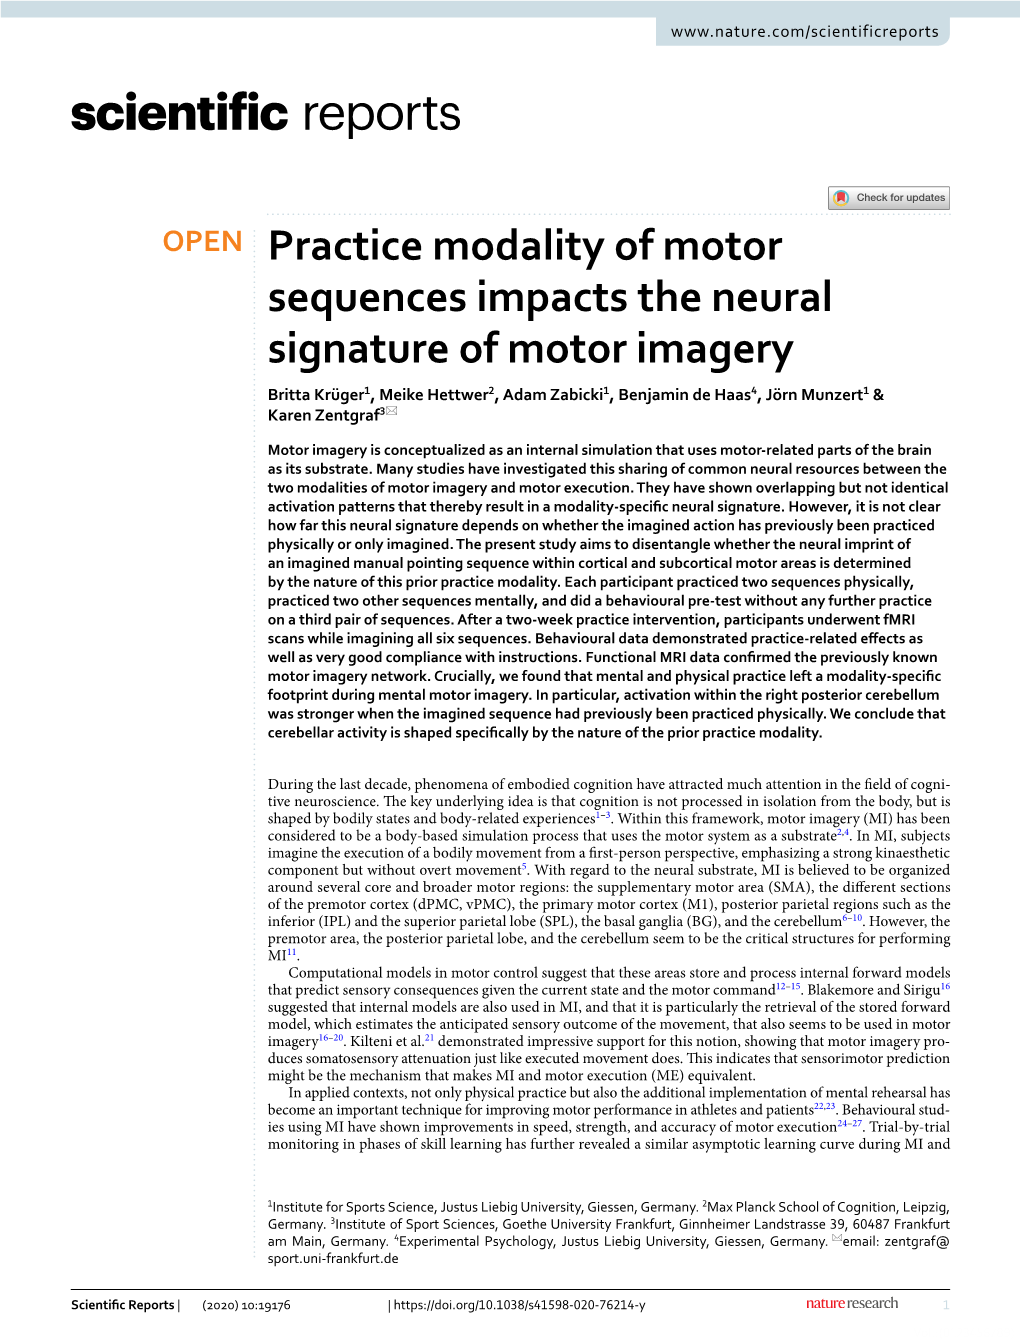 Practice Modality of Motor Sequences Impacts the Neural Signature Of